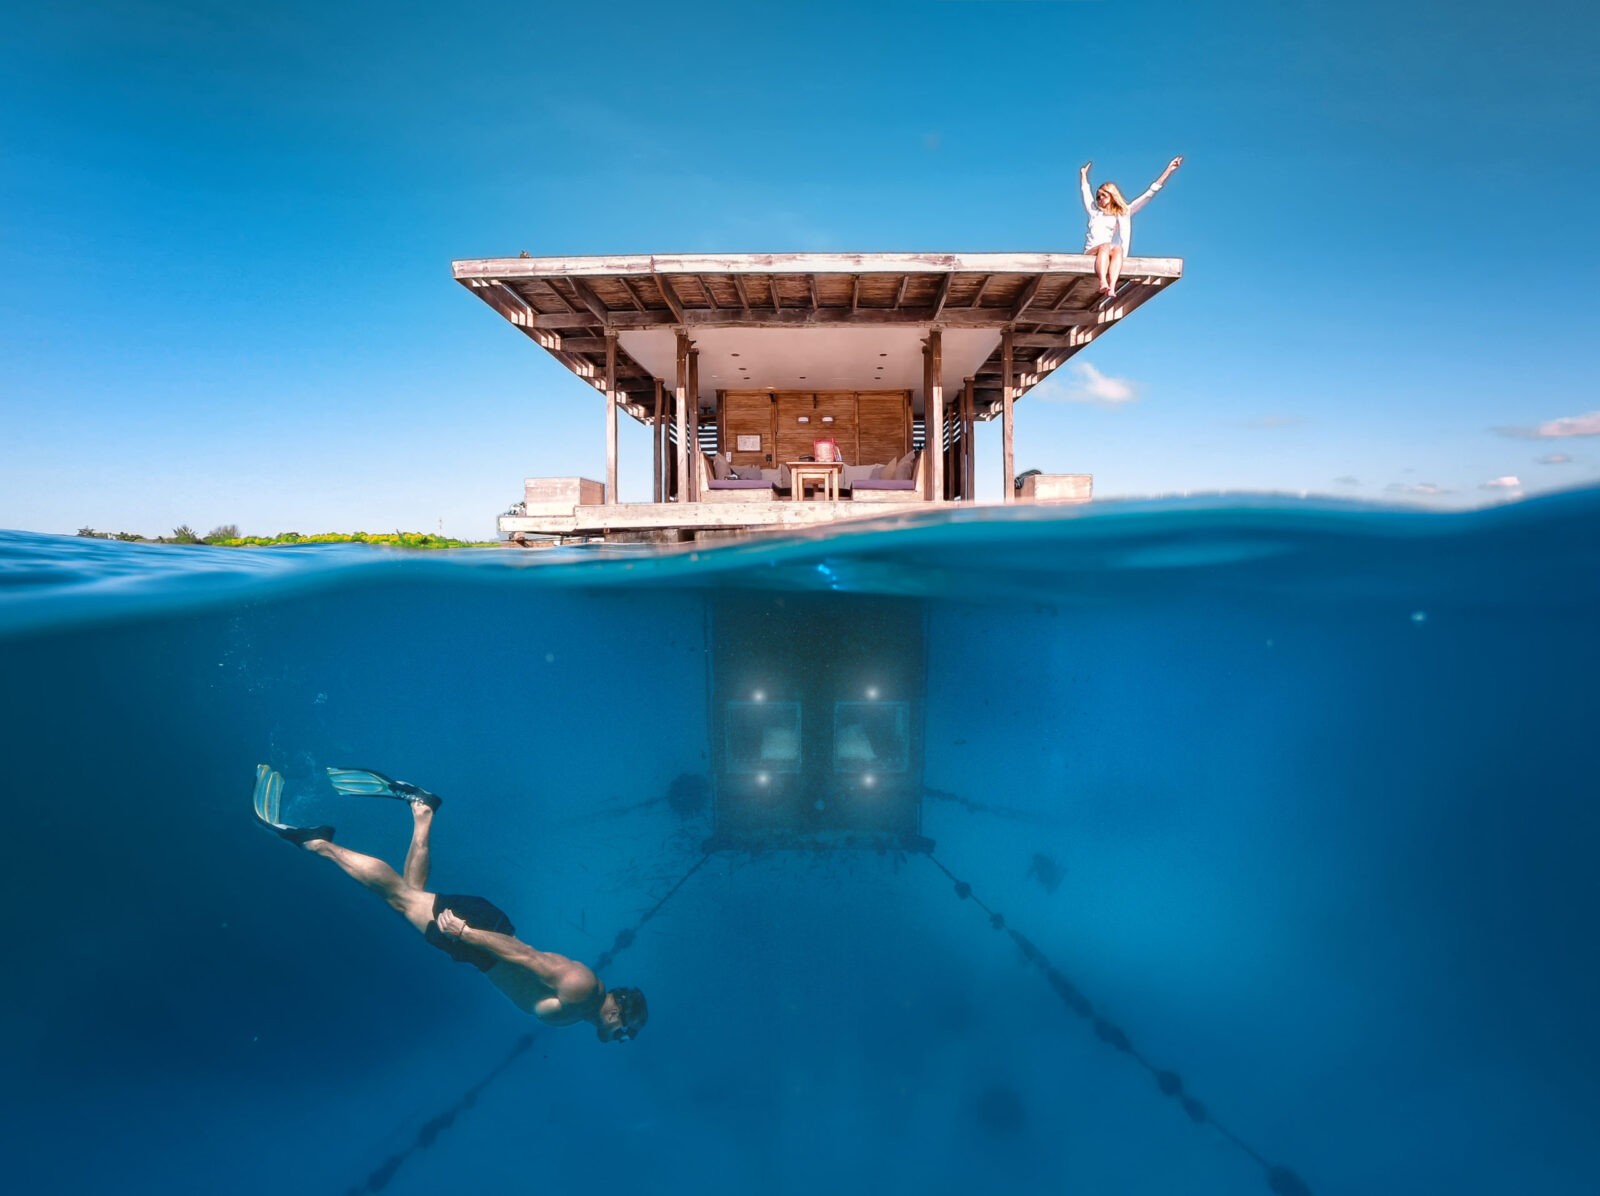 The Manta Resort & Underwater Room – Pemba Island: A Unique and Unforgettable Experience